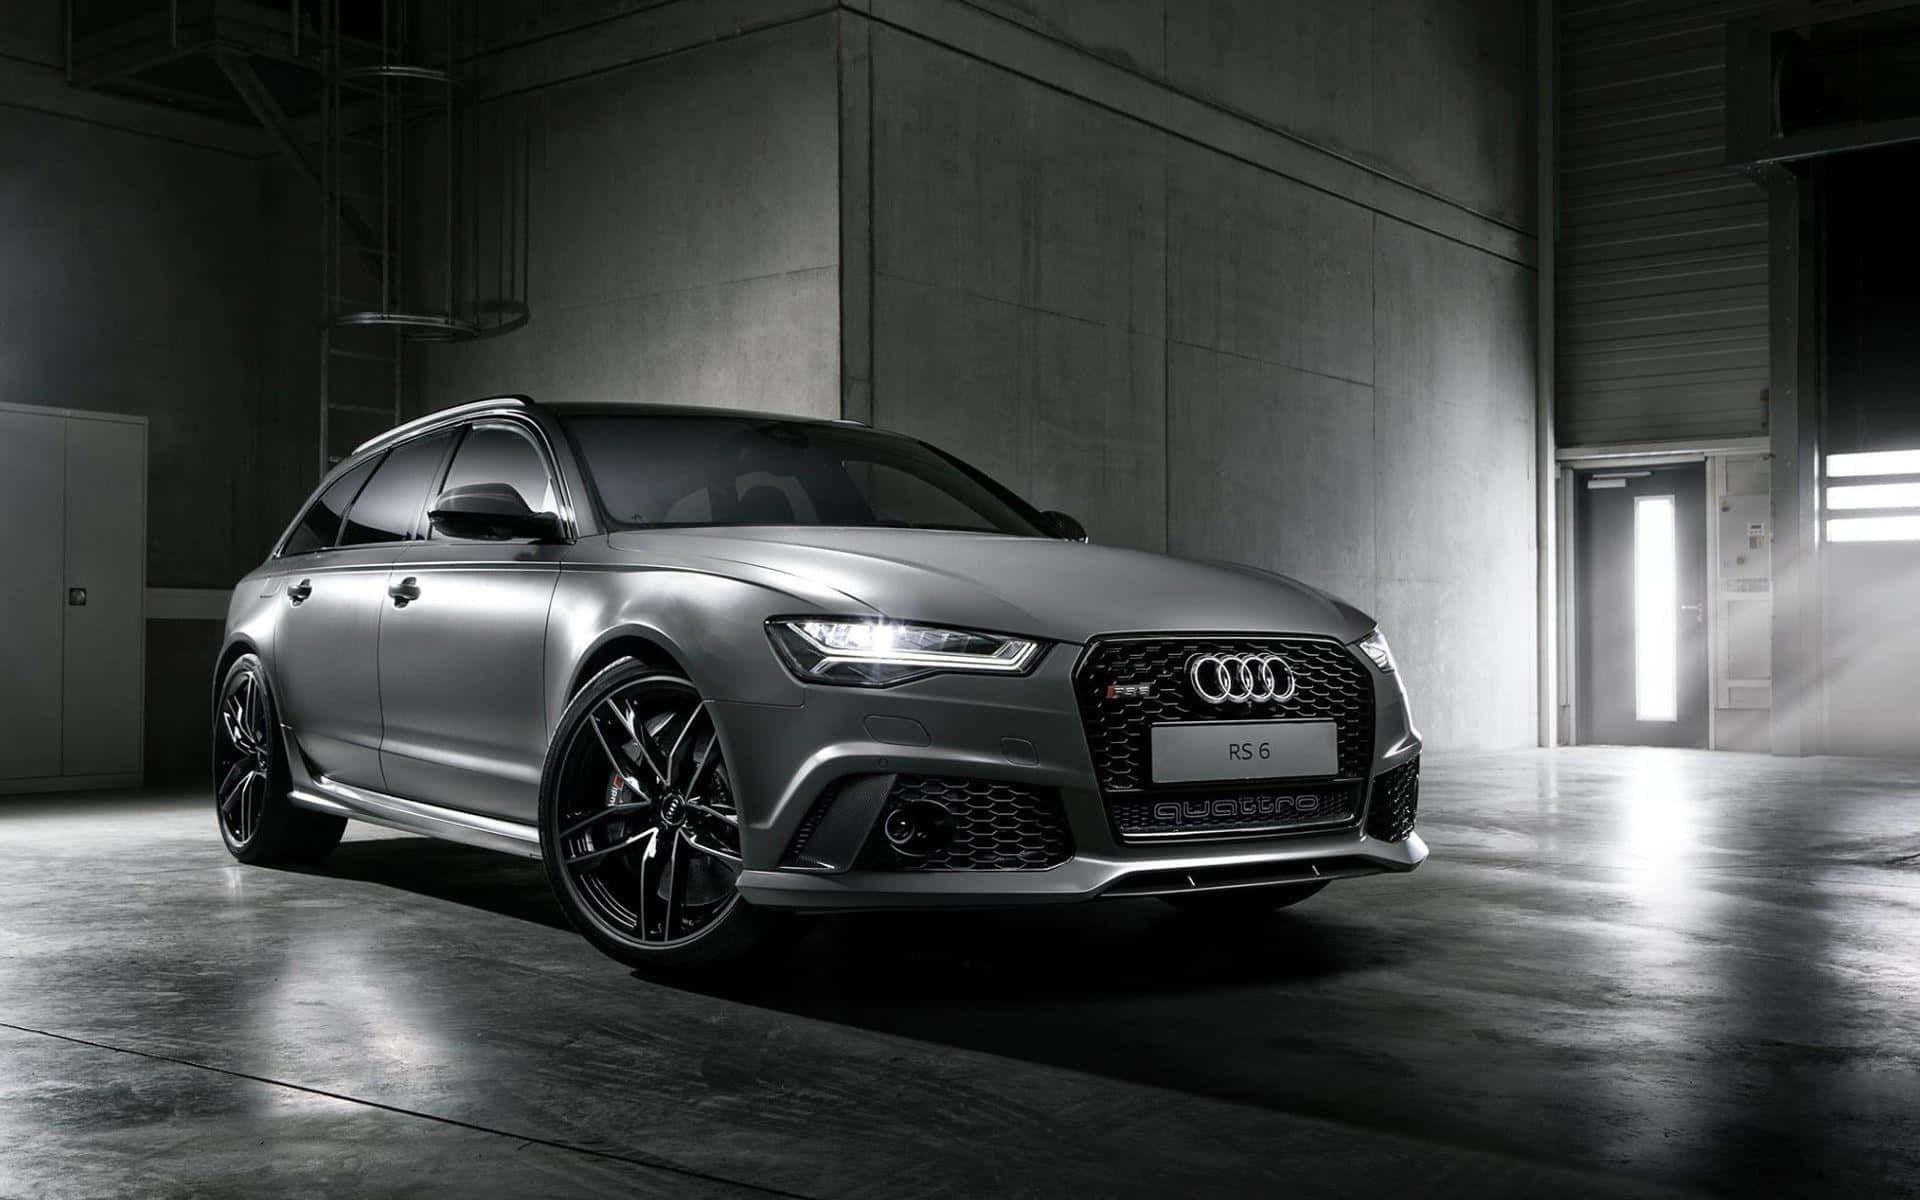 Sleek and Powerful Audi RS6 in Motion Wallpaper